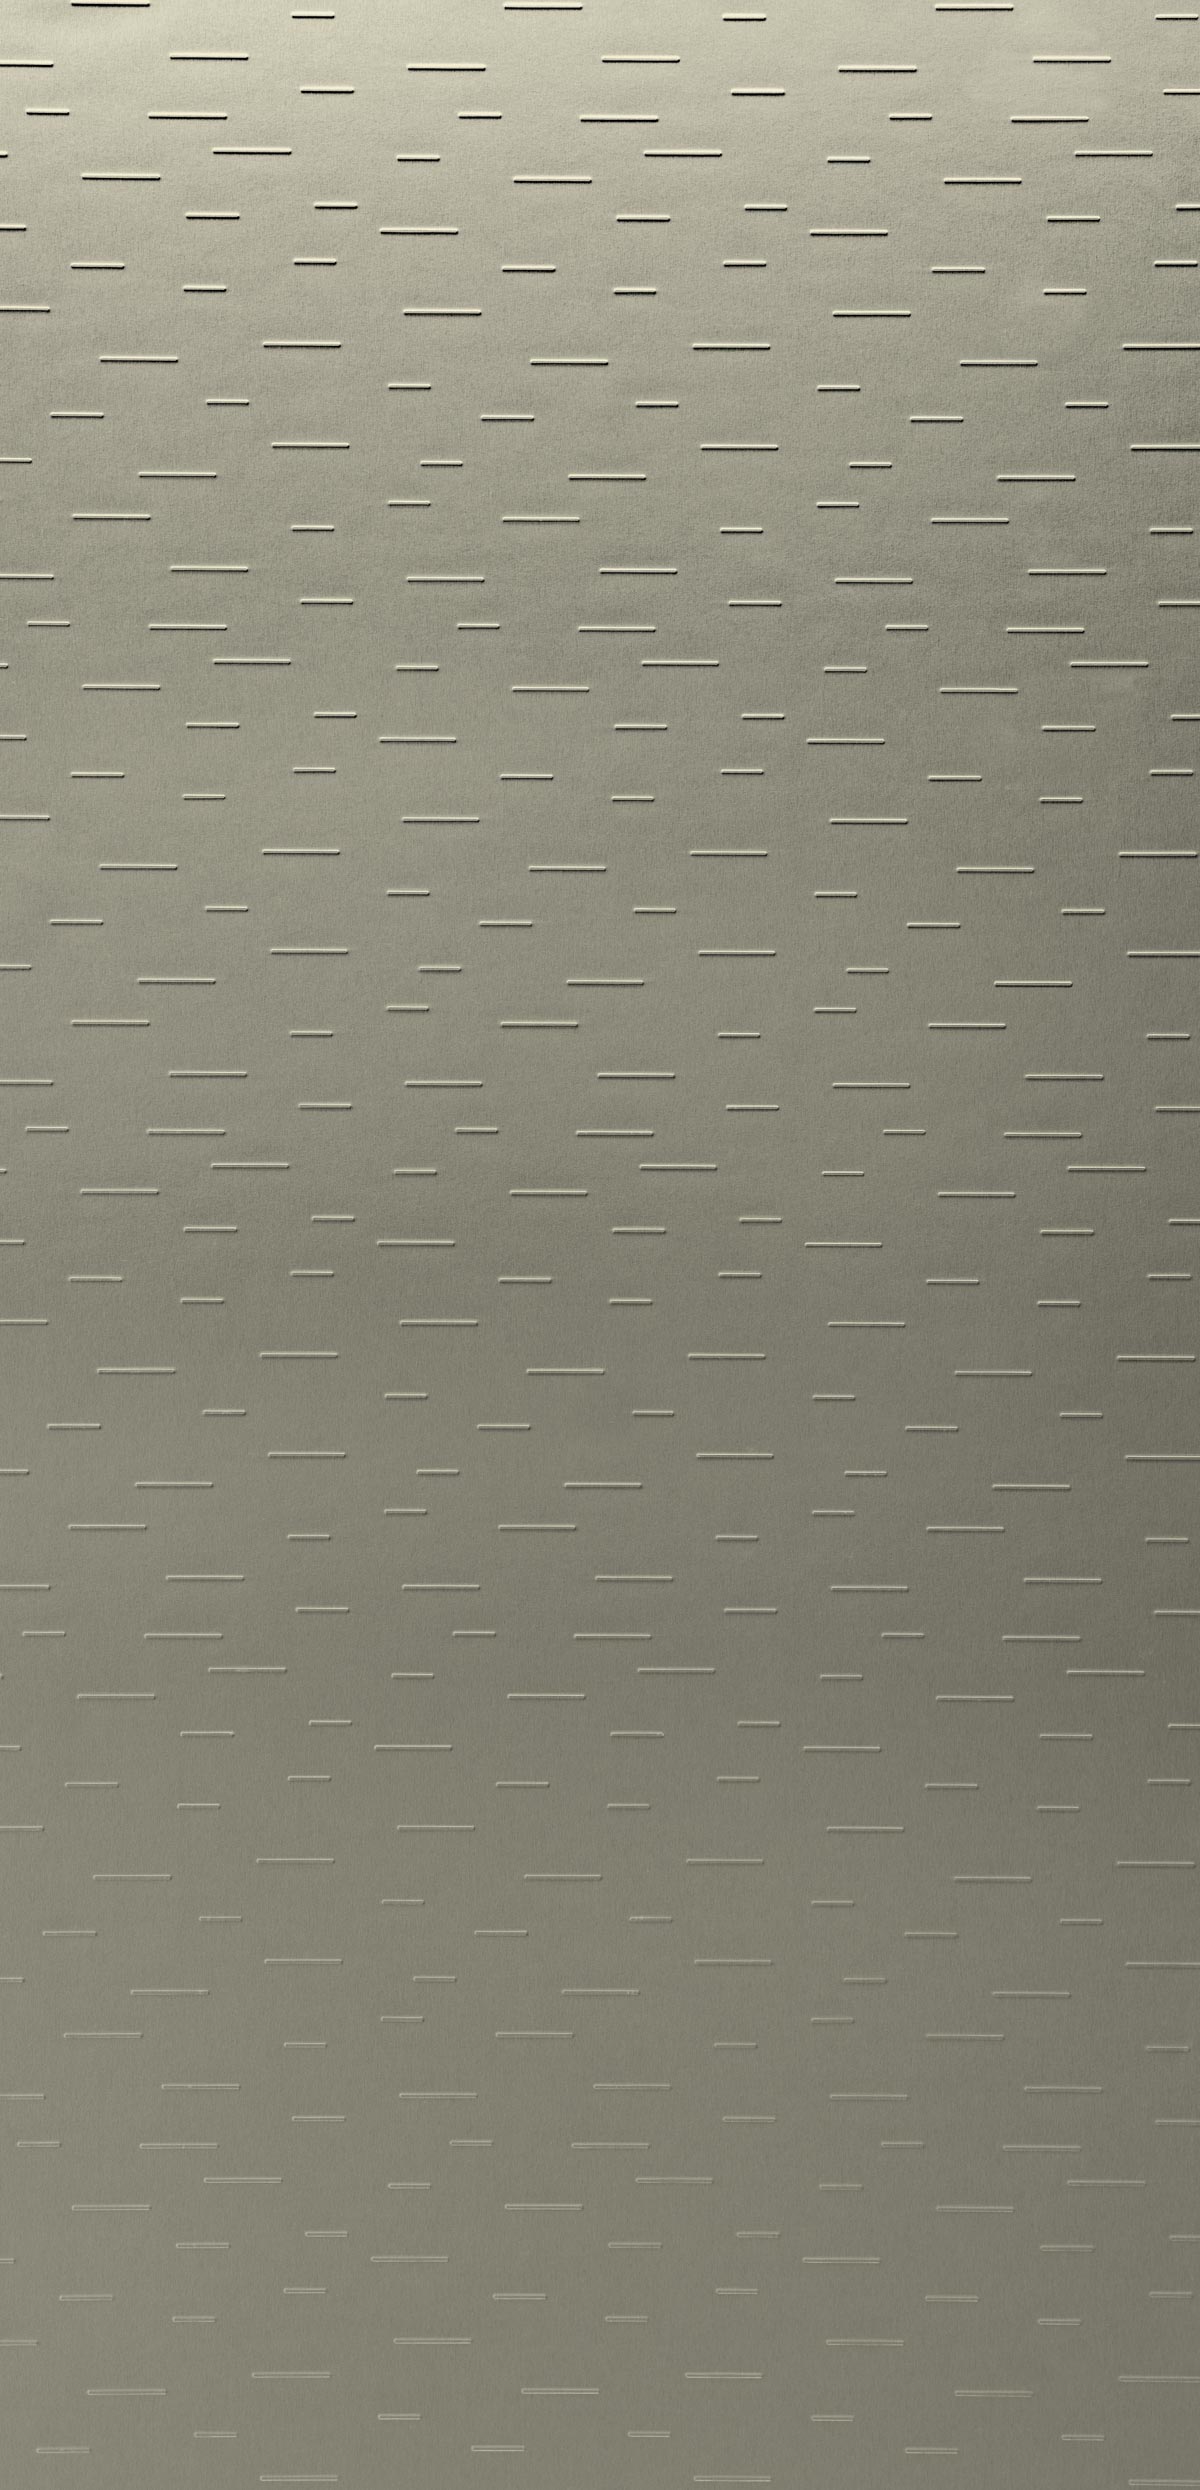 Champagne brushed 4051-panel